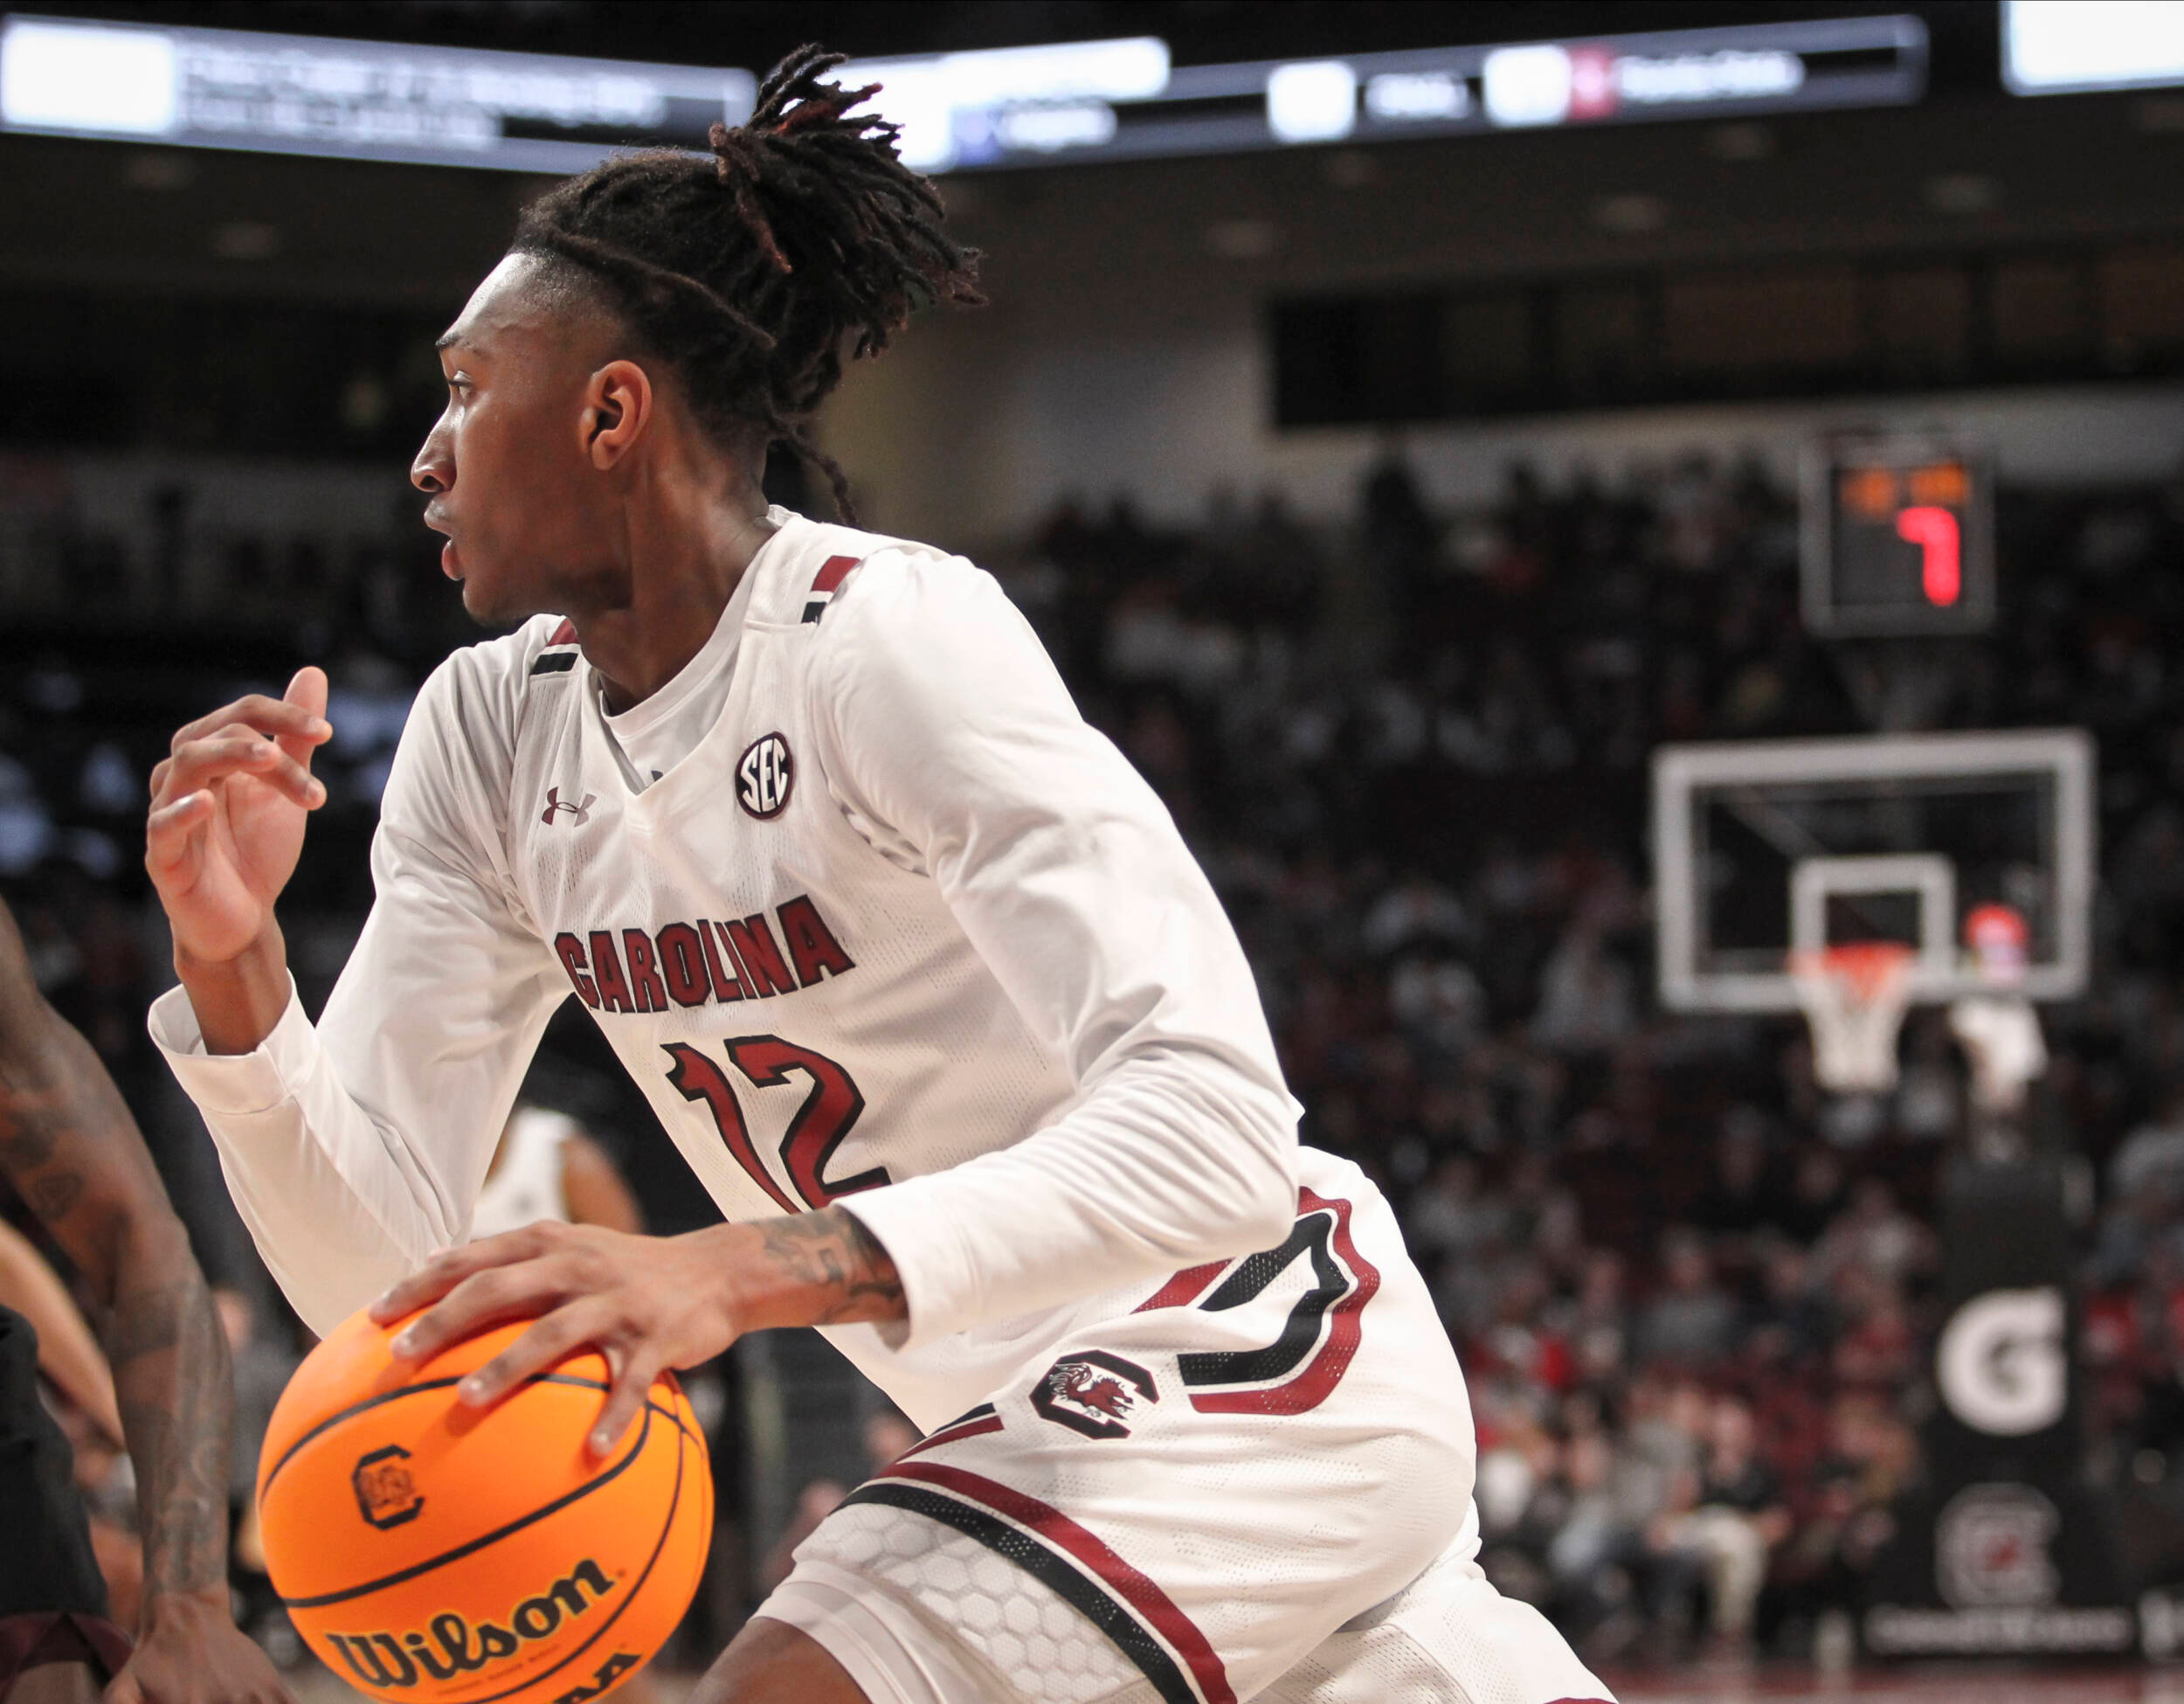 Gamecocks Take On Rebels Tuesday at CLA